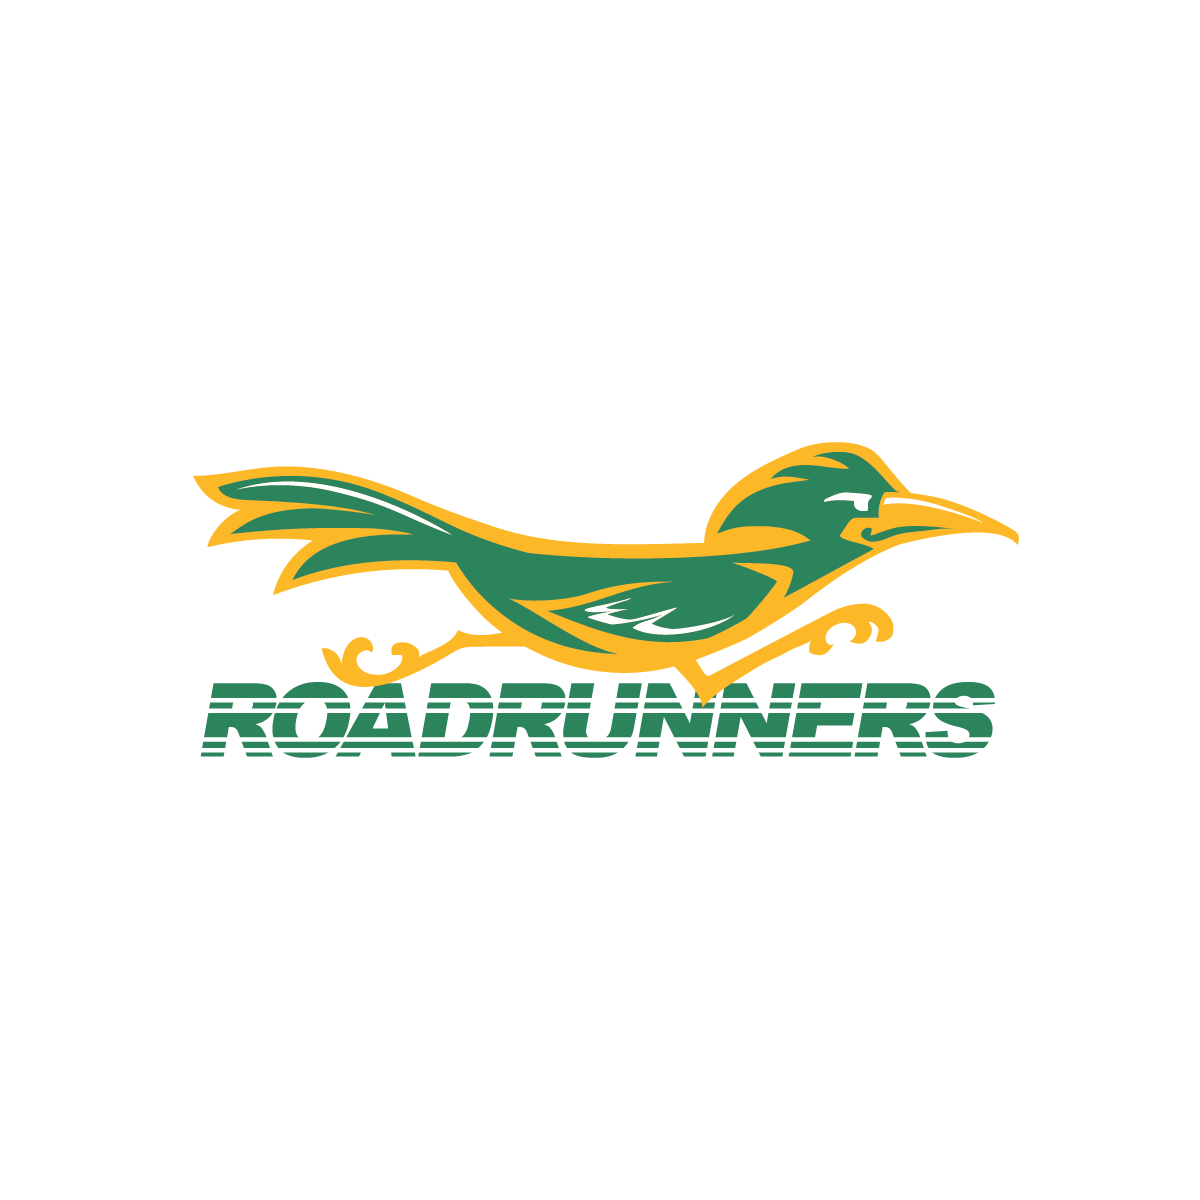 Athletics mascot with the word "Roadrunners" - color with no background color behind text